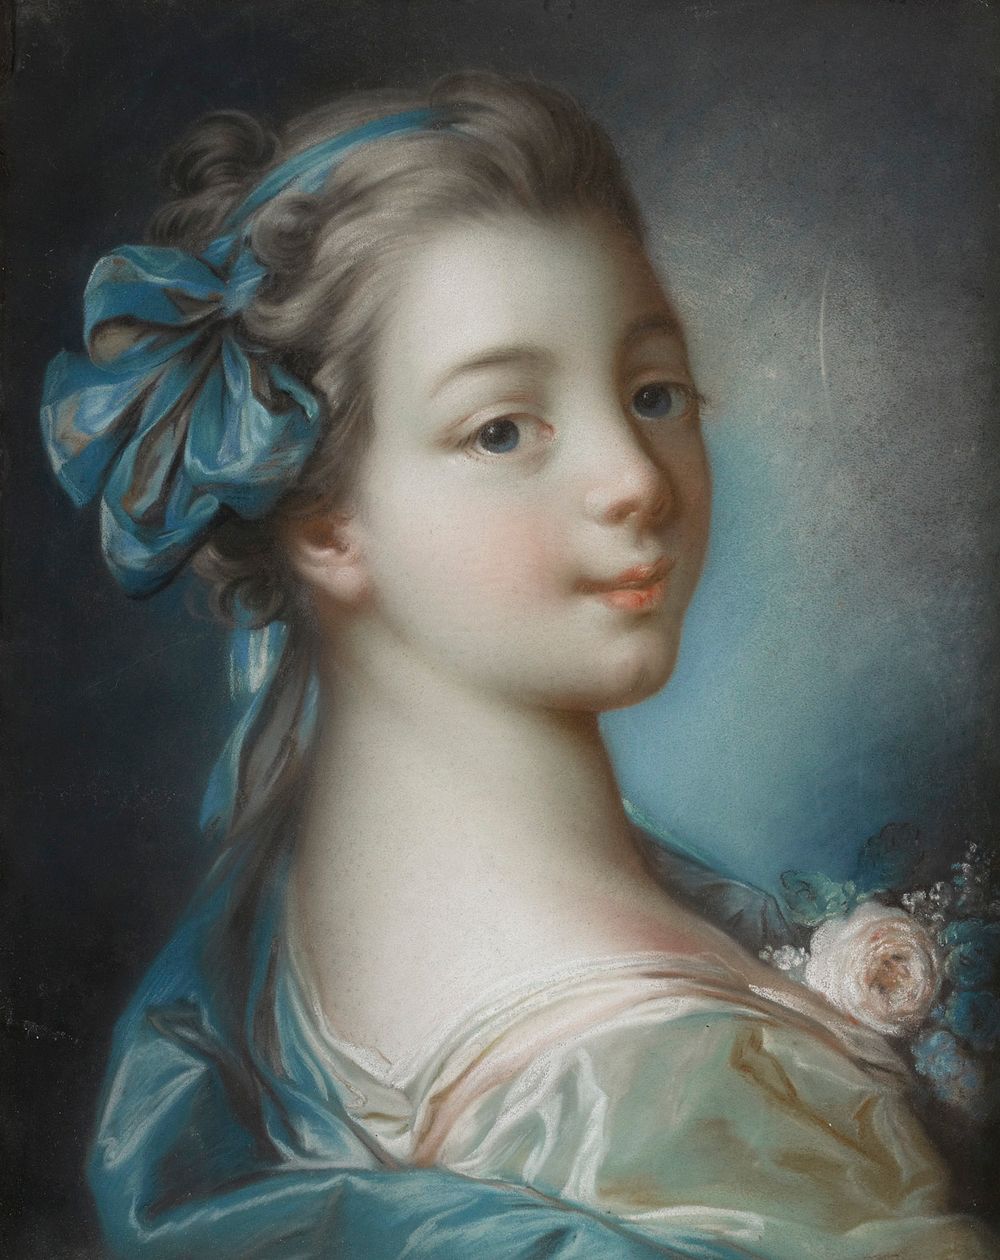 Young girl, 1760 - 1770, Fran&ccedil;ois Boucher